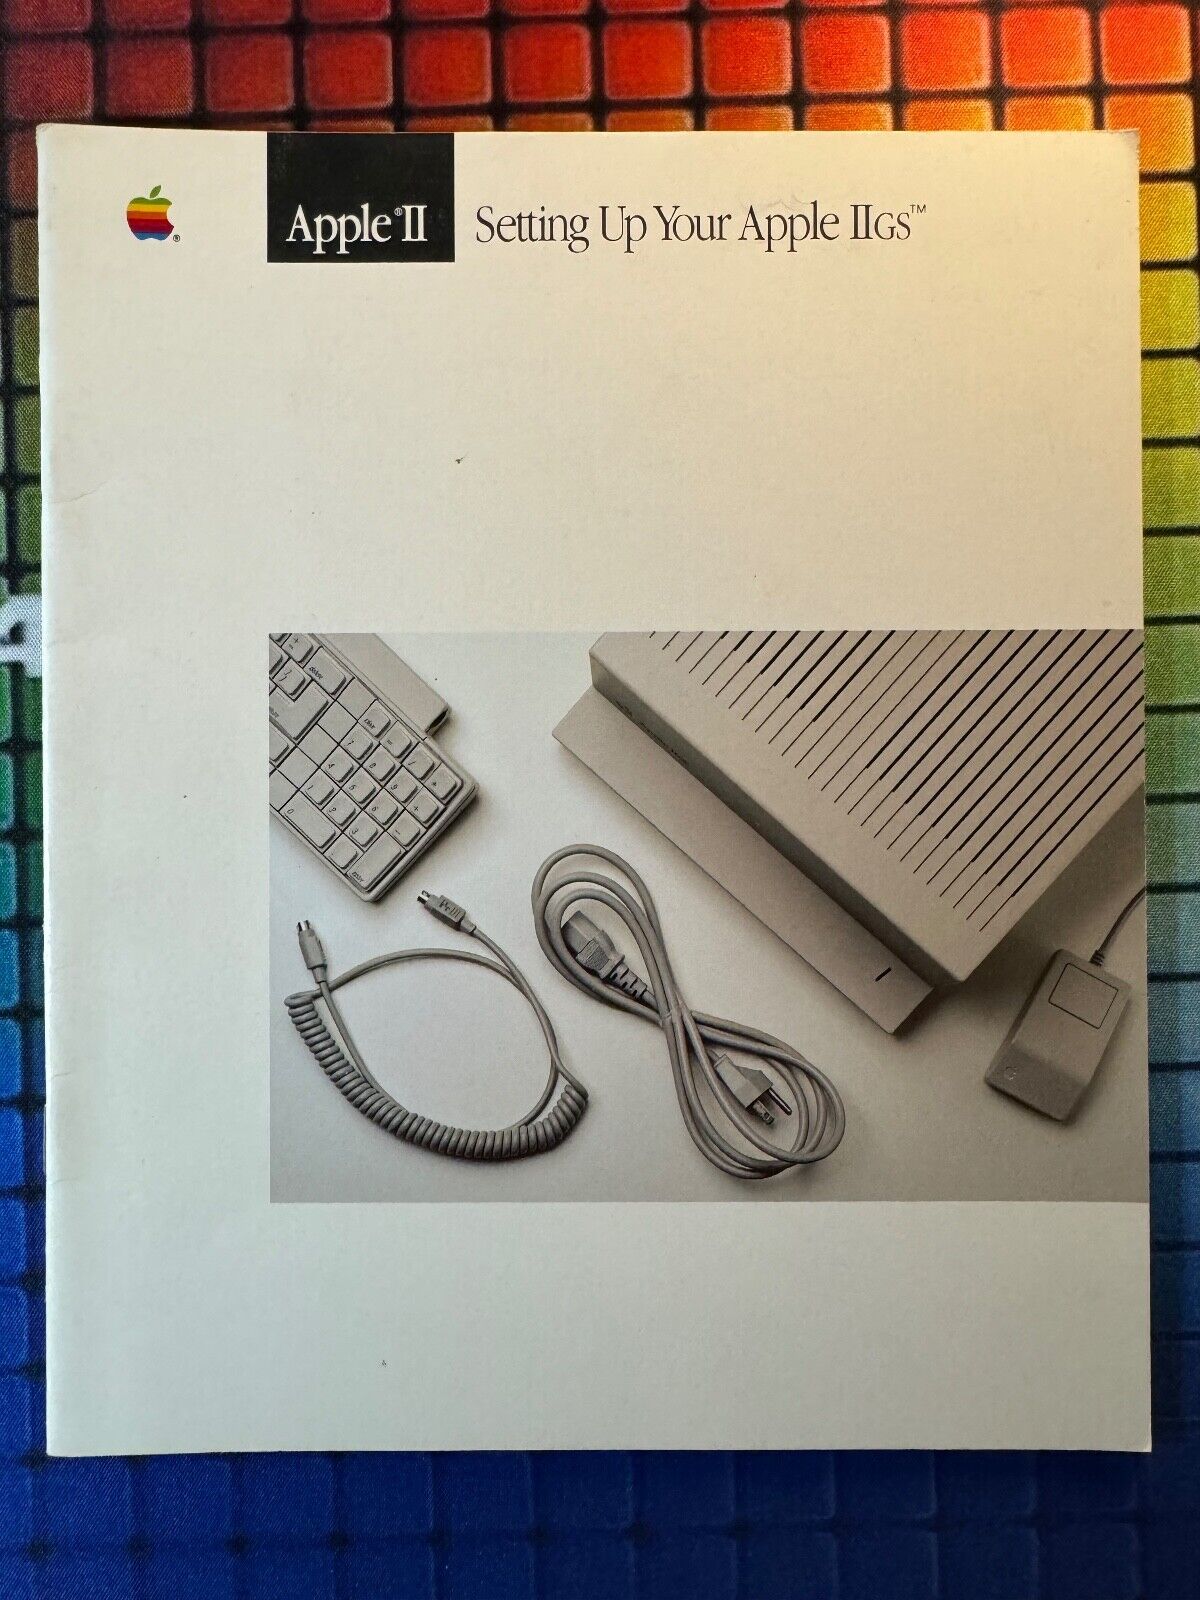 Apple II Setting Up Your Apple IIGS -22 Pages